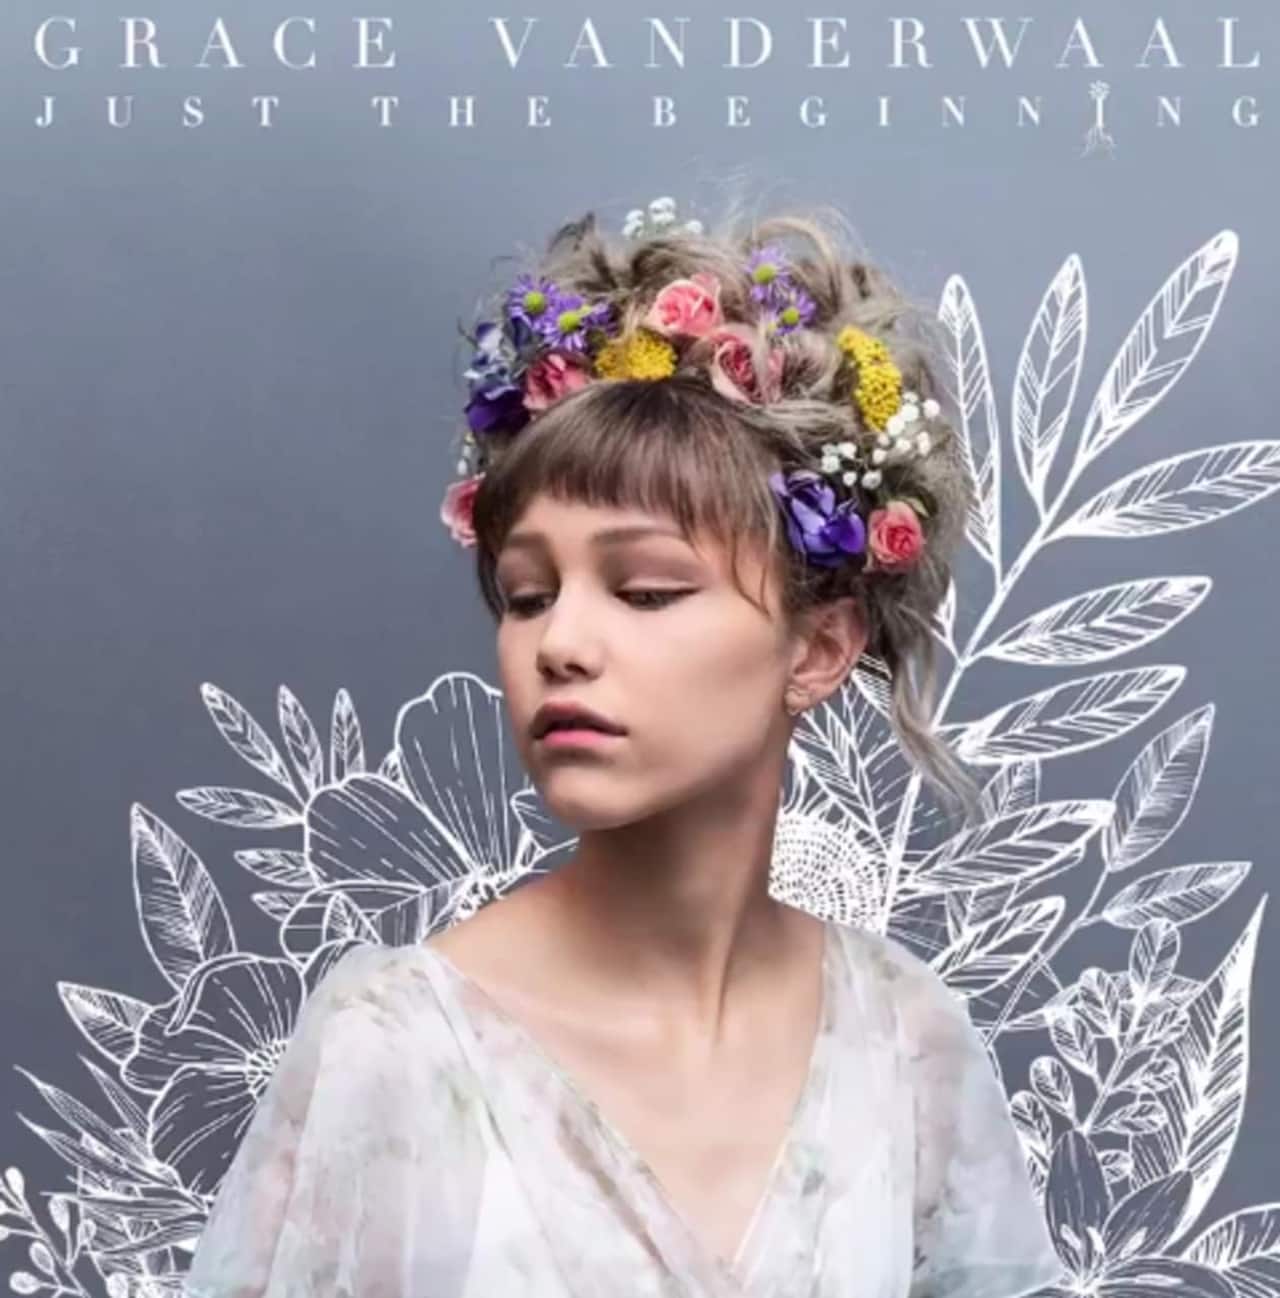 "Just the Beginning" is the new album by Suffern resident Grace VanderWaal.